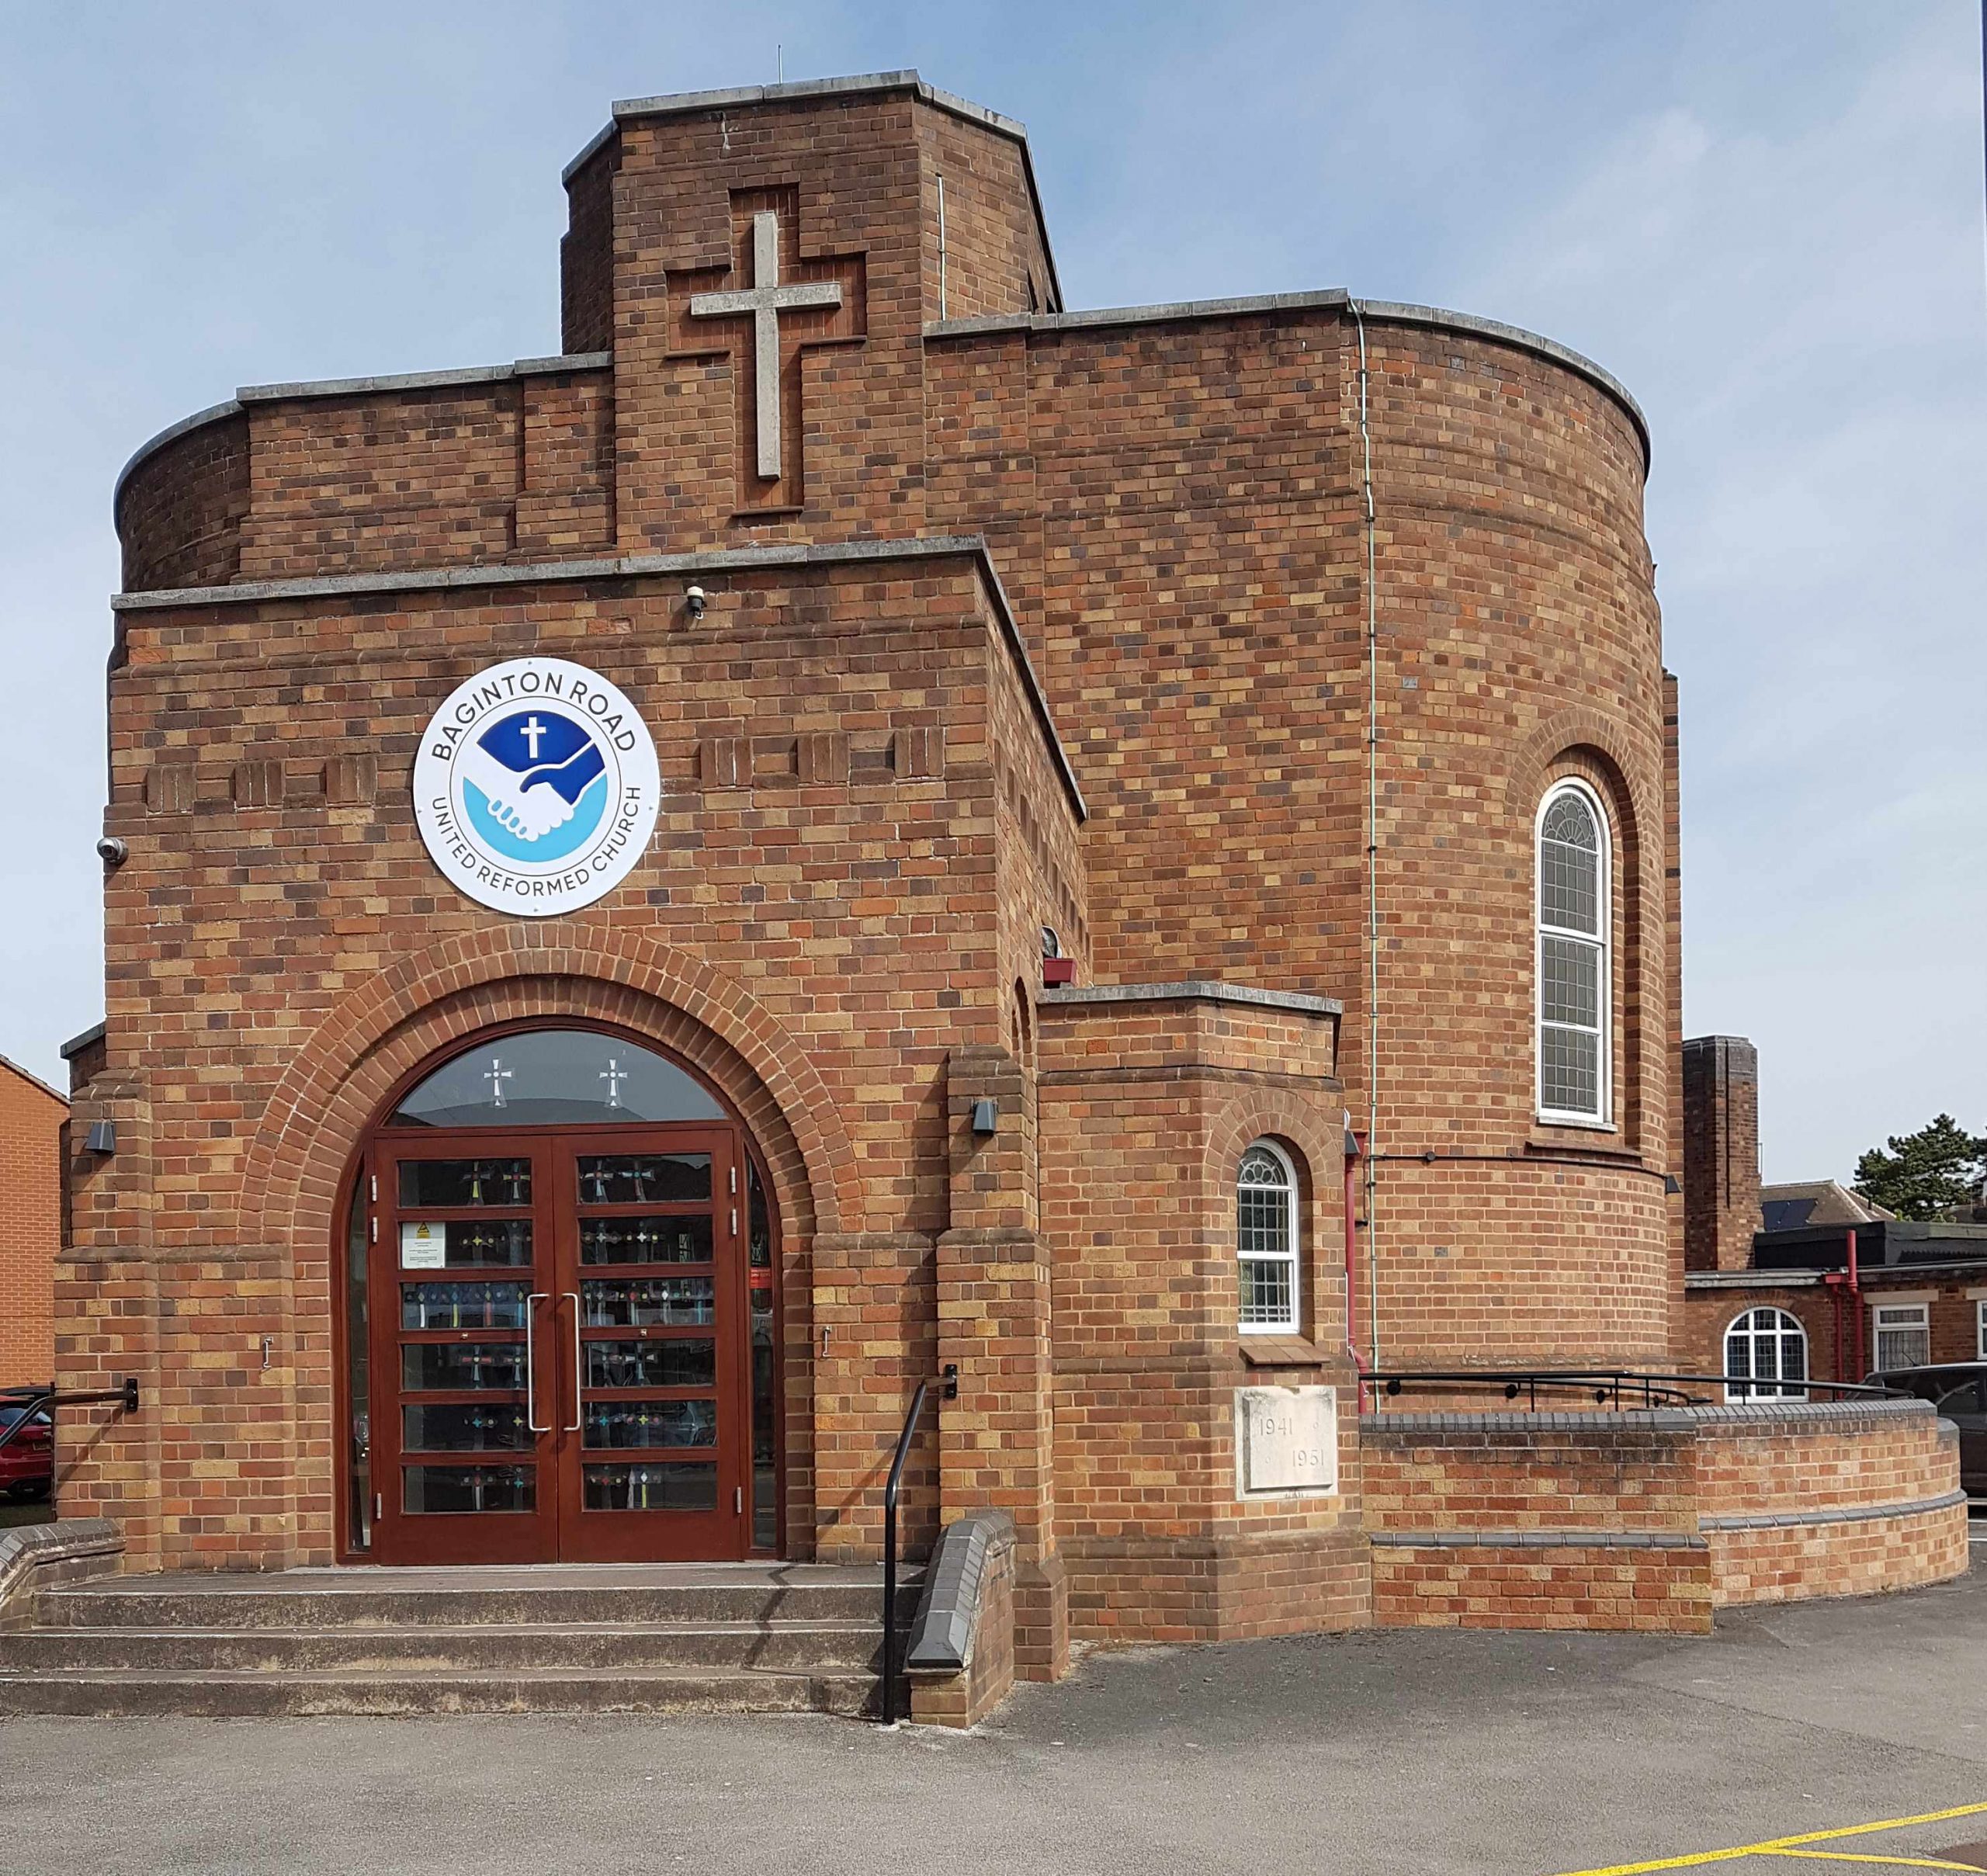 Baginton Road URC are looking for an experienced full-time Pastor